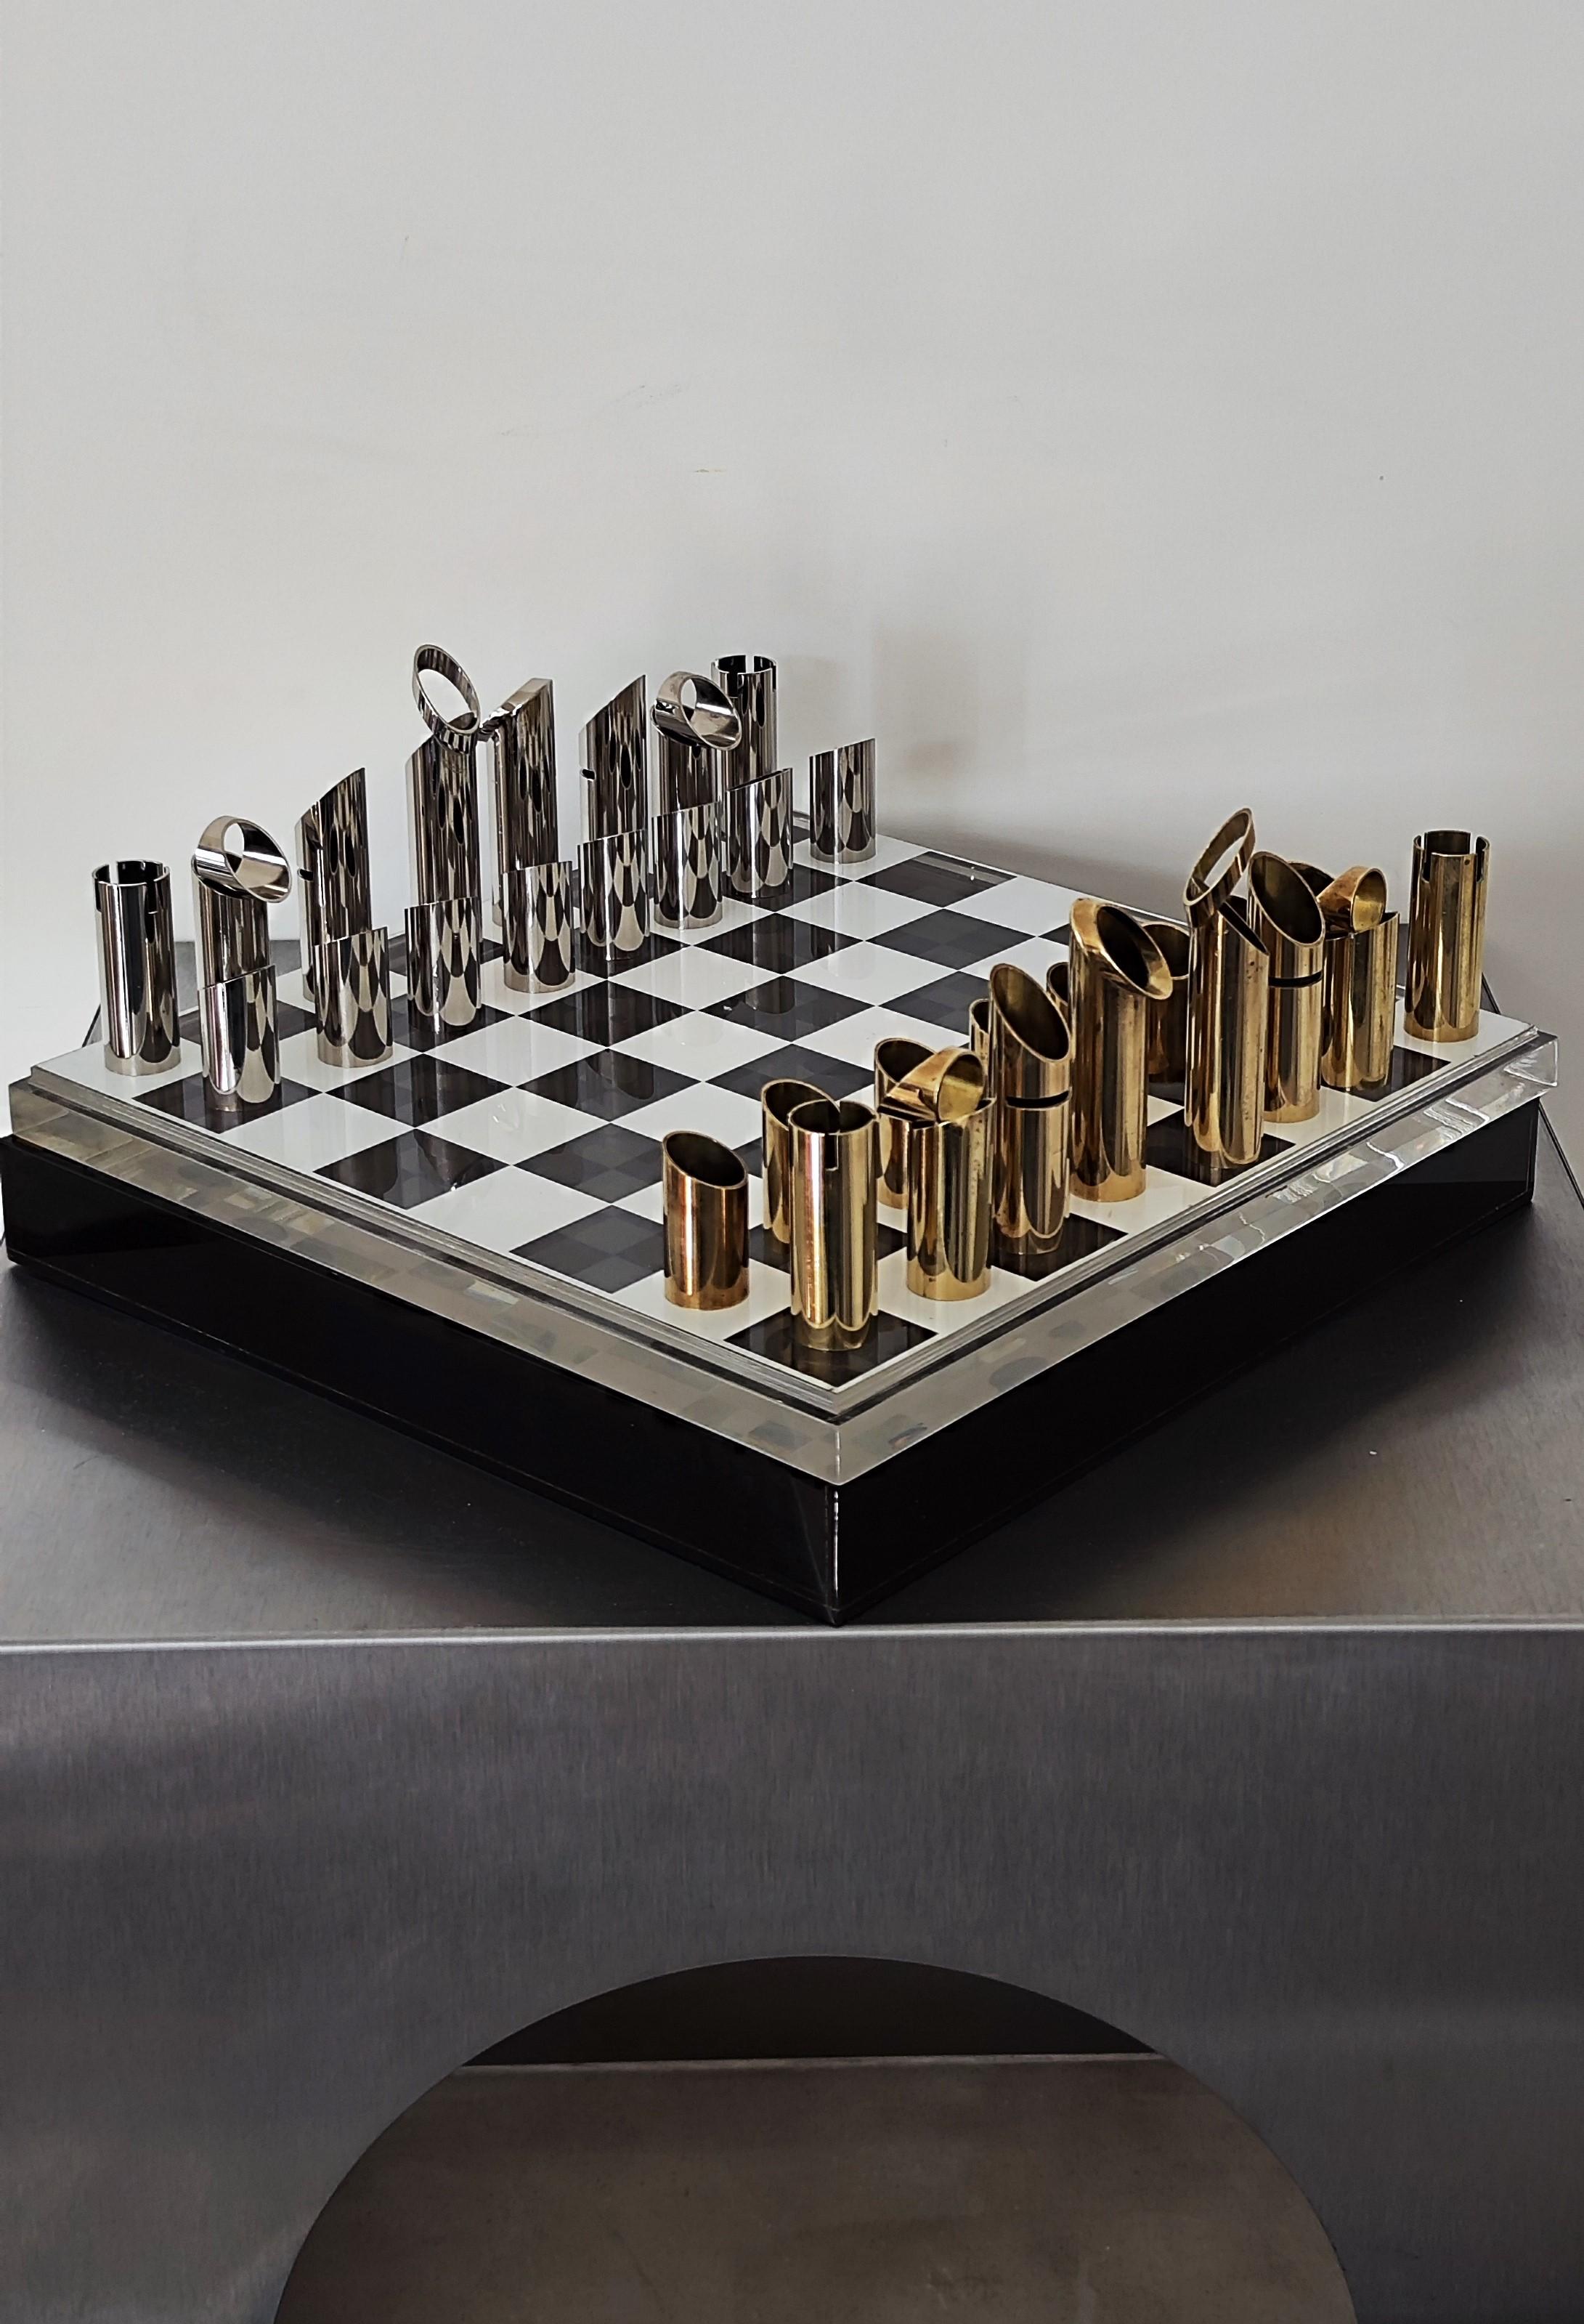 Chess set and board/base.
.
Mario VenChess set and board, 1970 / 1980.
.
Plexiglas top, polished steel and bronze parts.
.
Superb condition, unique design.
.
Dimensions :

Plateau :
32 cm square per side,
6 cm in height.

Pieces :
From 4cm to